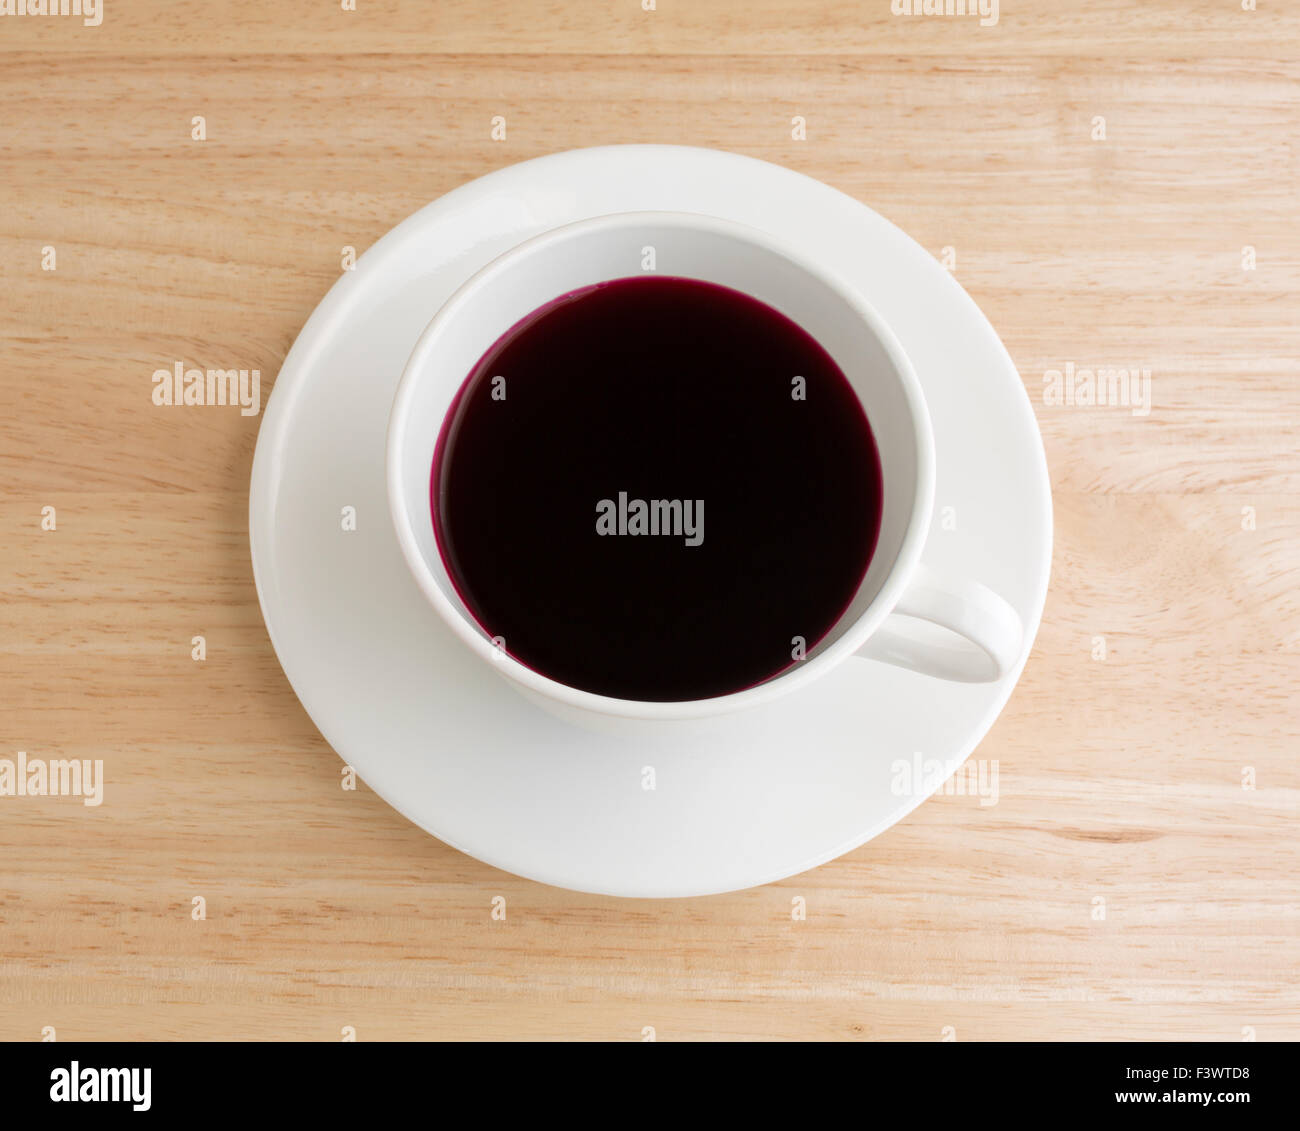 Beet juice in a white coffee cup and saucer atop a wood table top illuminated with natural light. Stock Photo